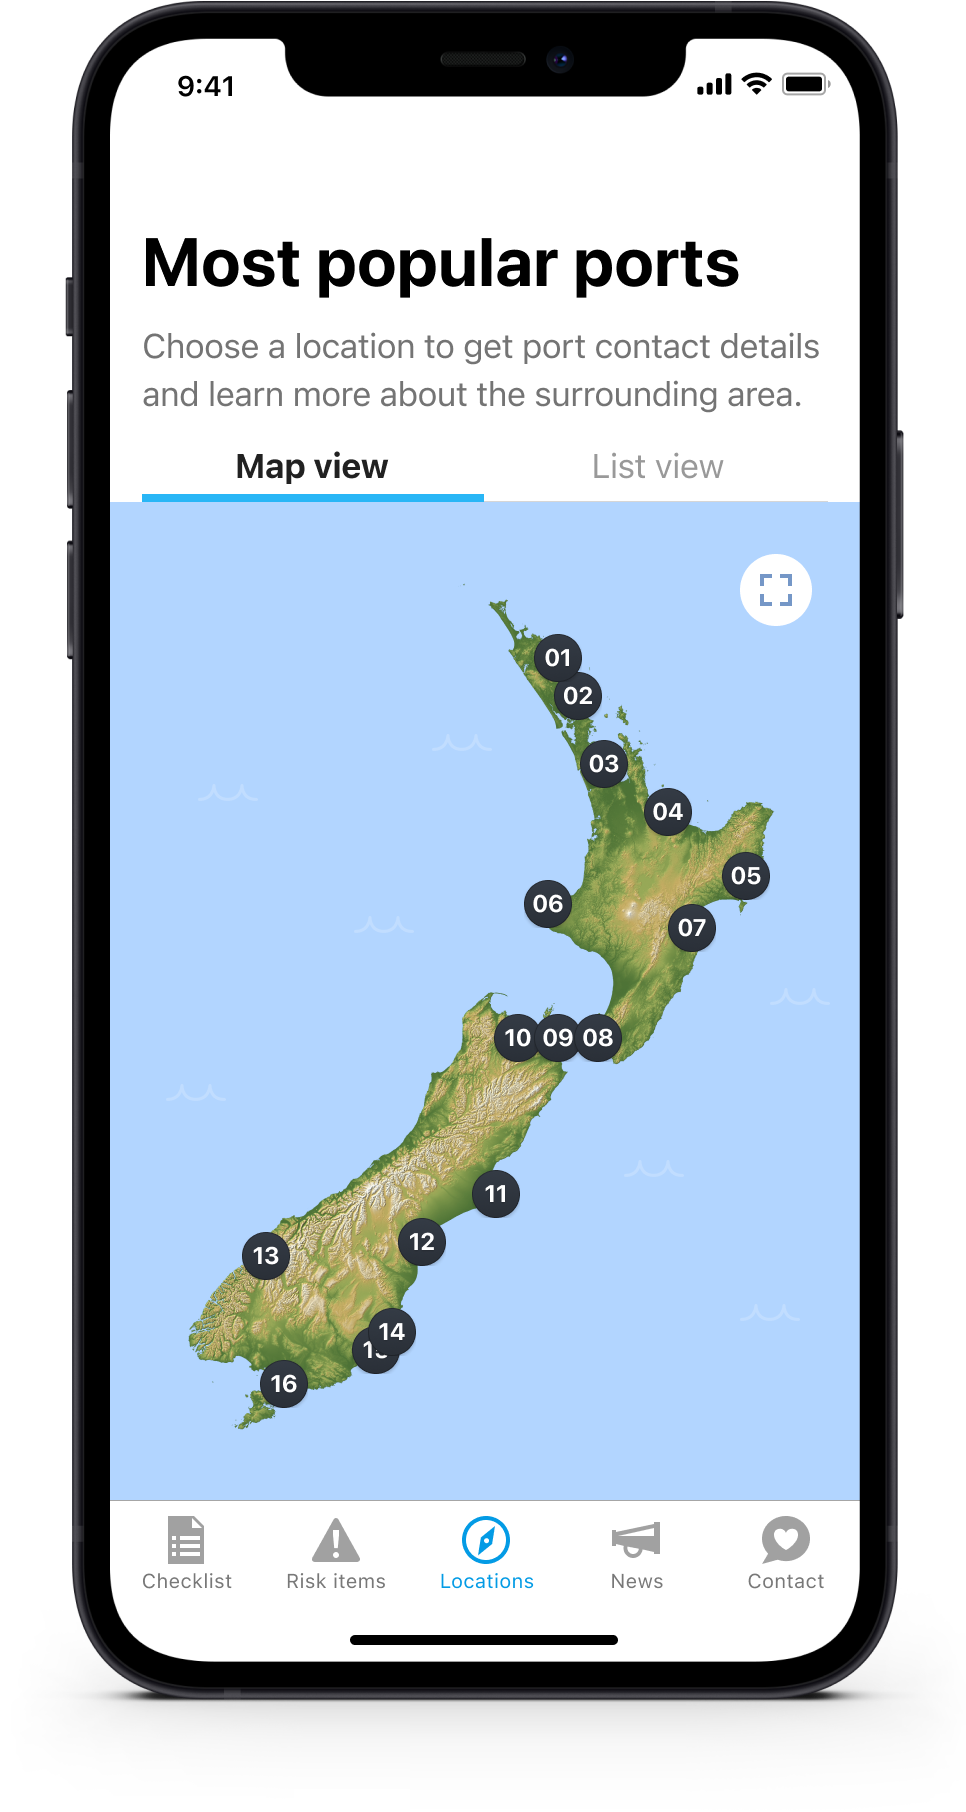 Coming to New Zealand locations most popular ports